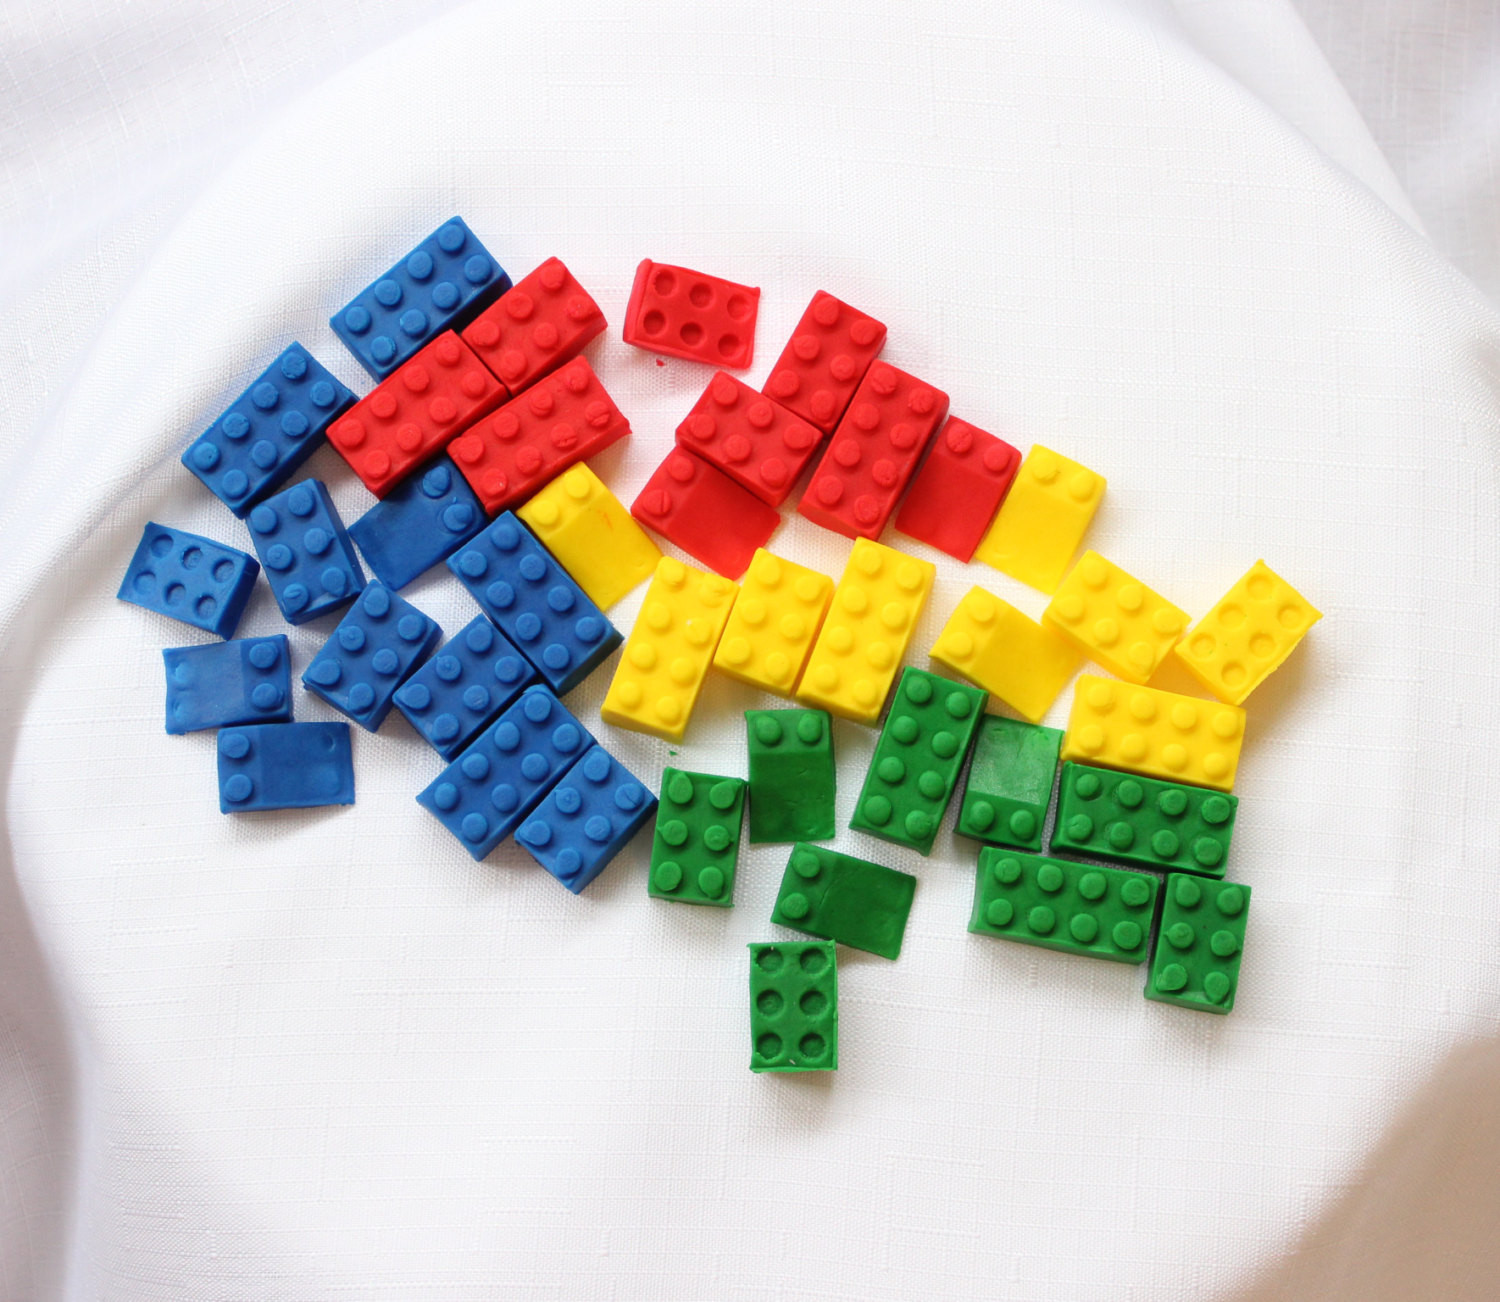 Lego Birthday Cake Topper
 36 lego cupcake toppers assorted edible fondant cake topper